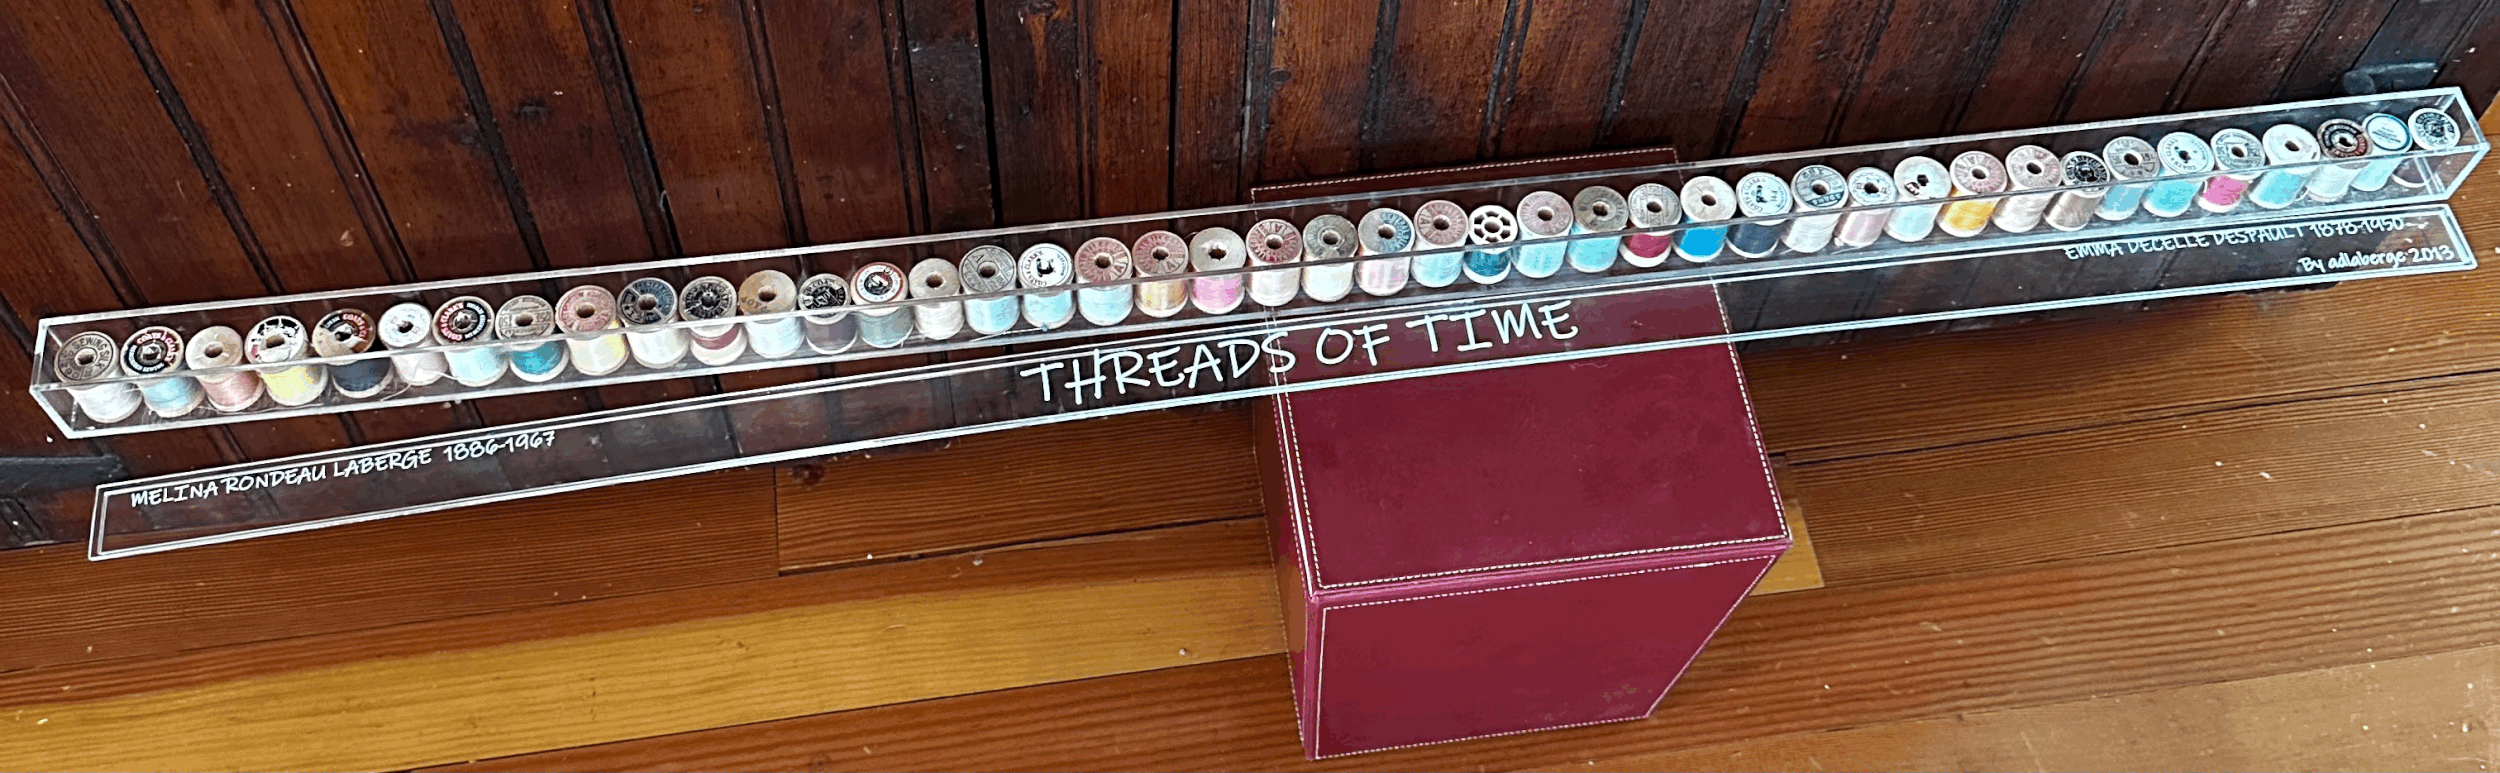 Treads of Time